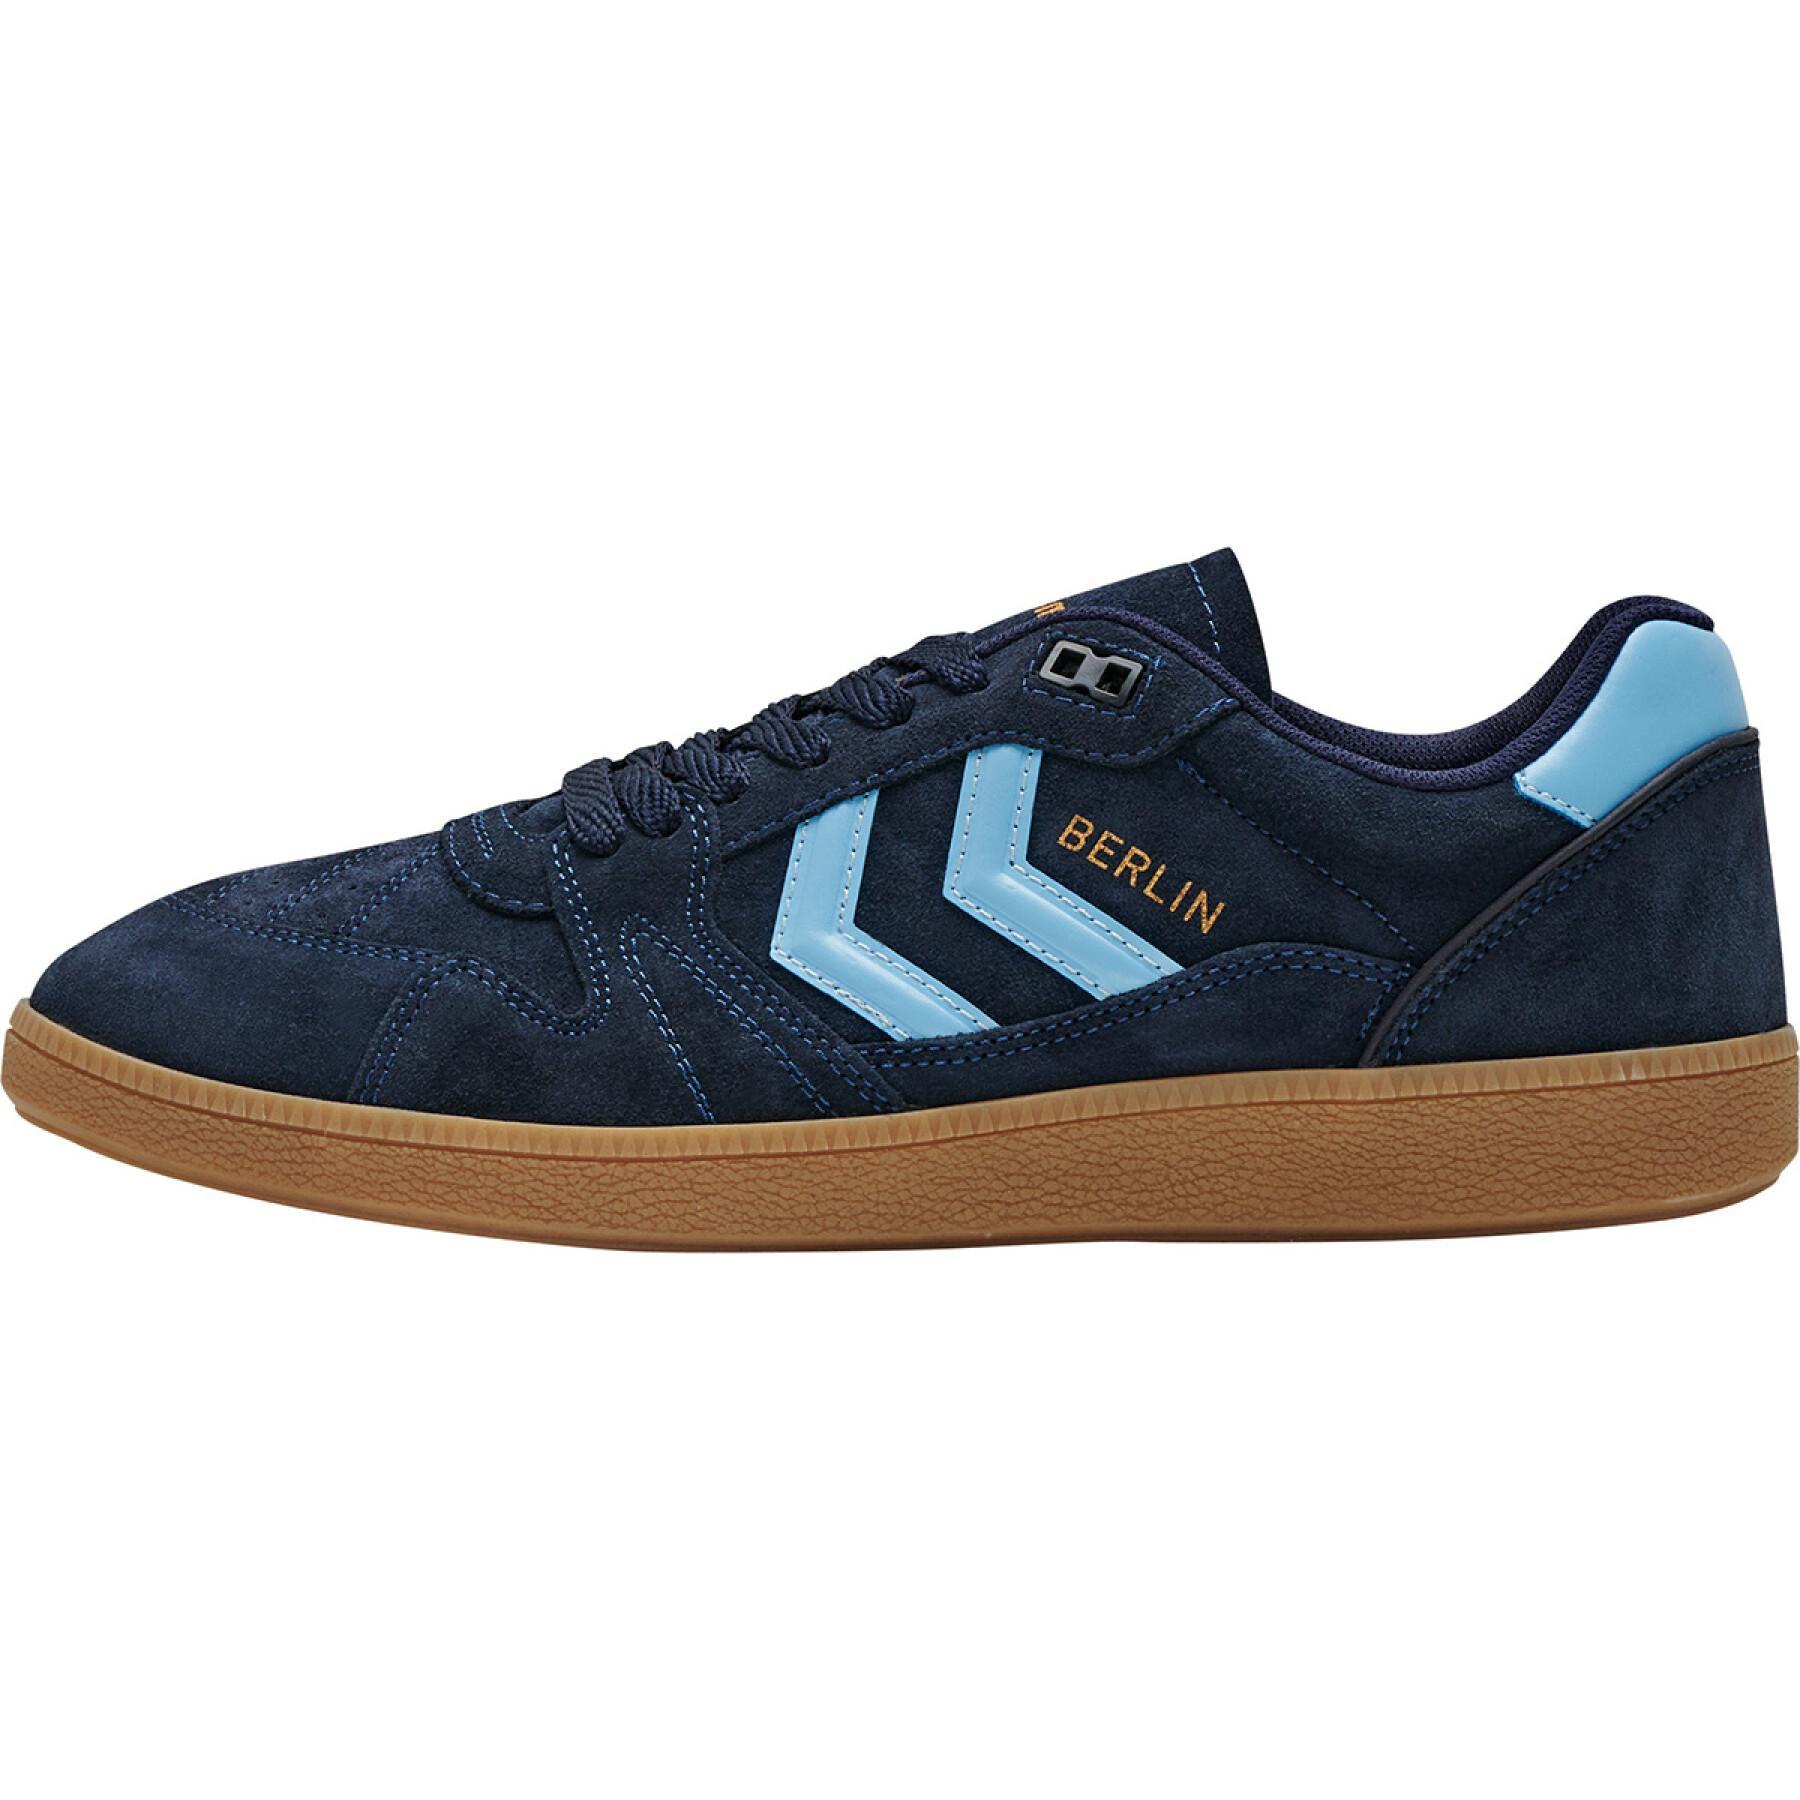 Trainers Hummel hb team suede